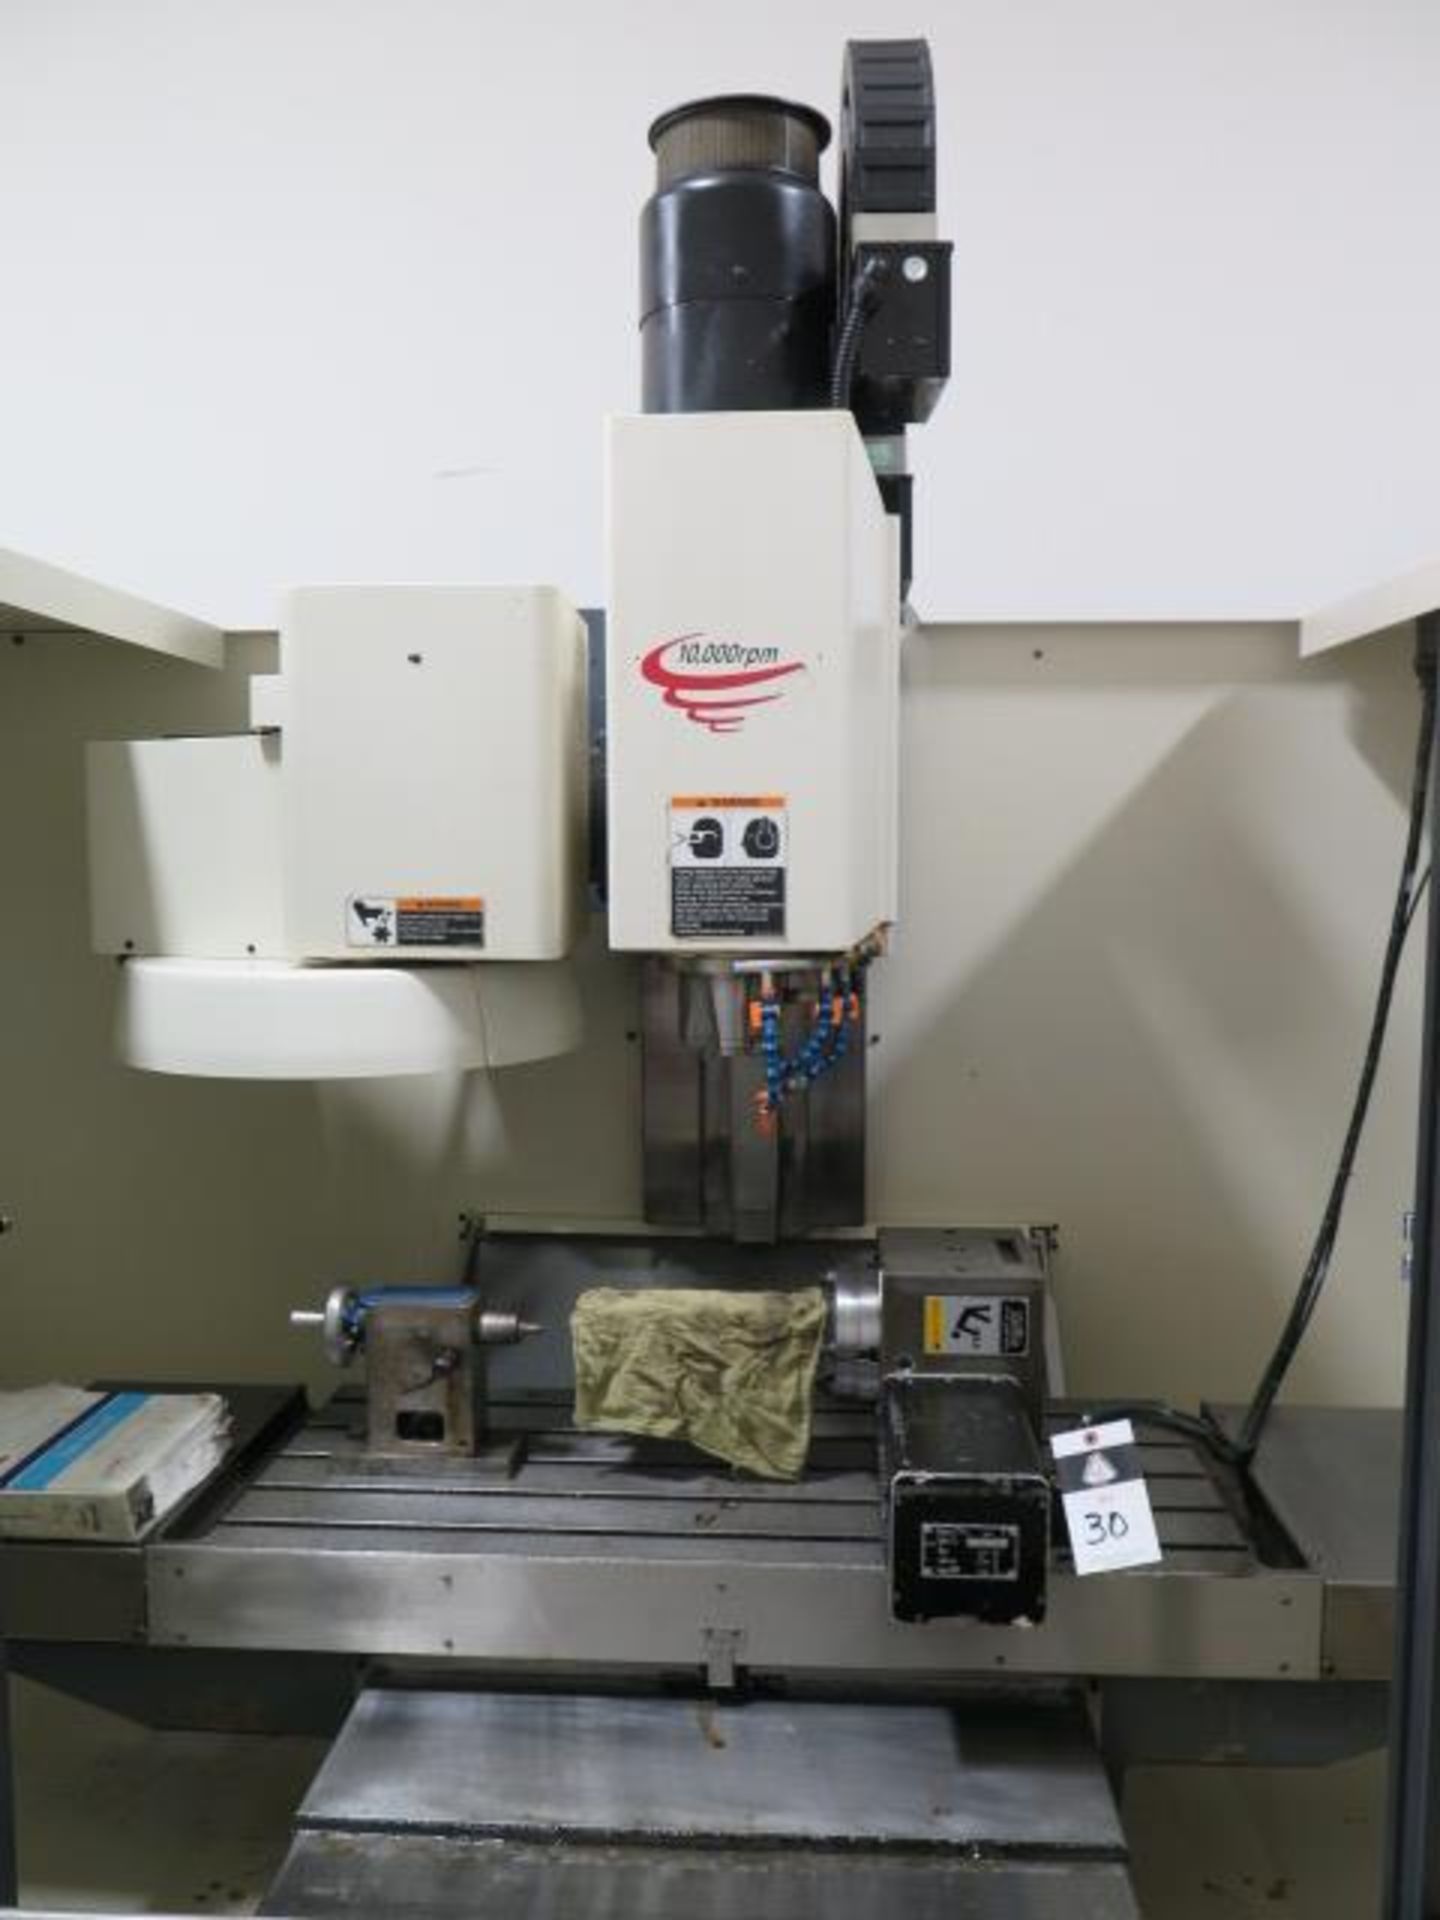 1997 Fadal VMC4020 4-Axis CNC VMC s/n 9612006 w/ Fadal Multi Processor CNC, SOLD AS IS - Image 4 of 14